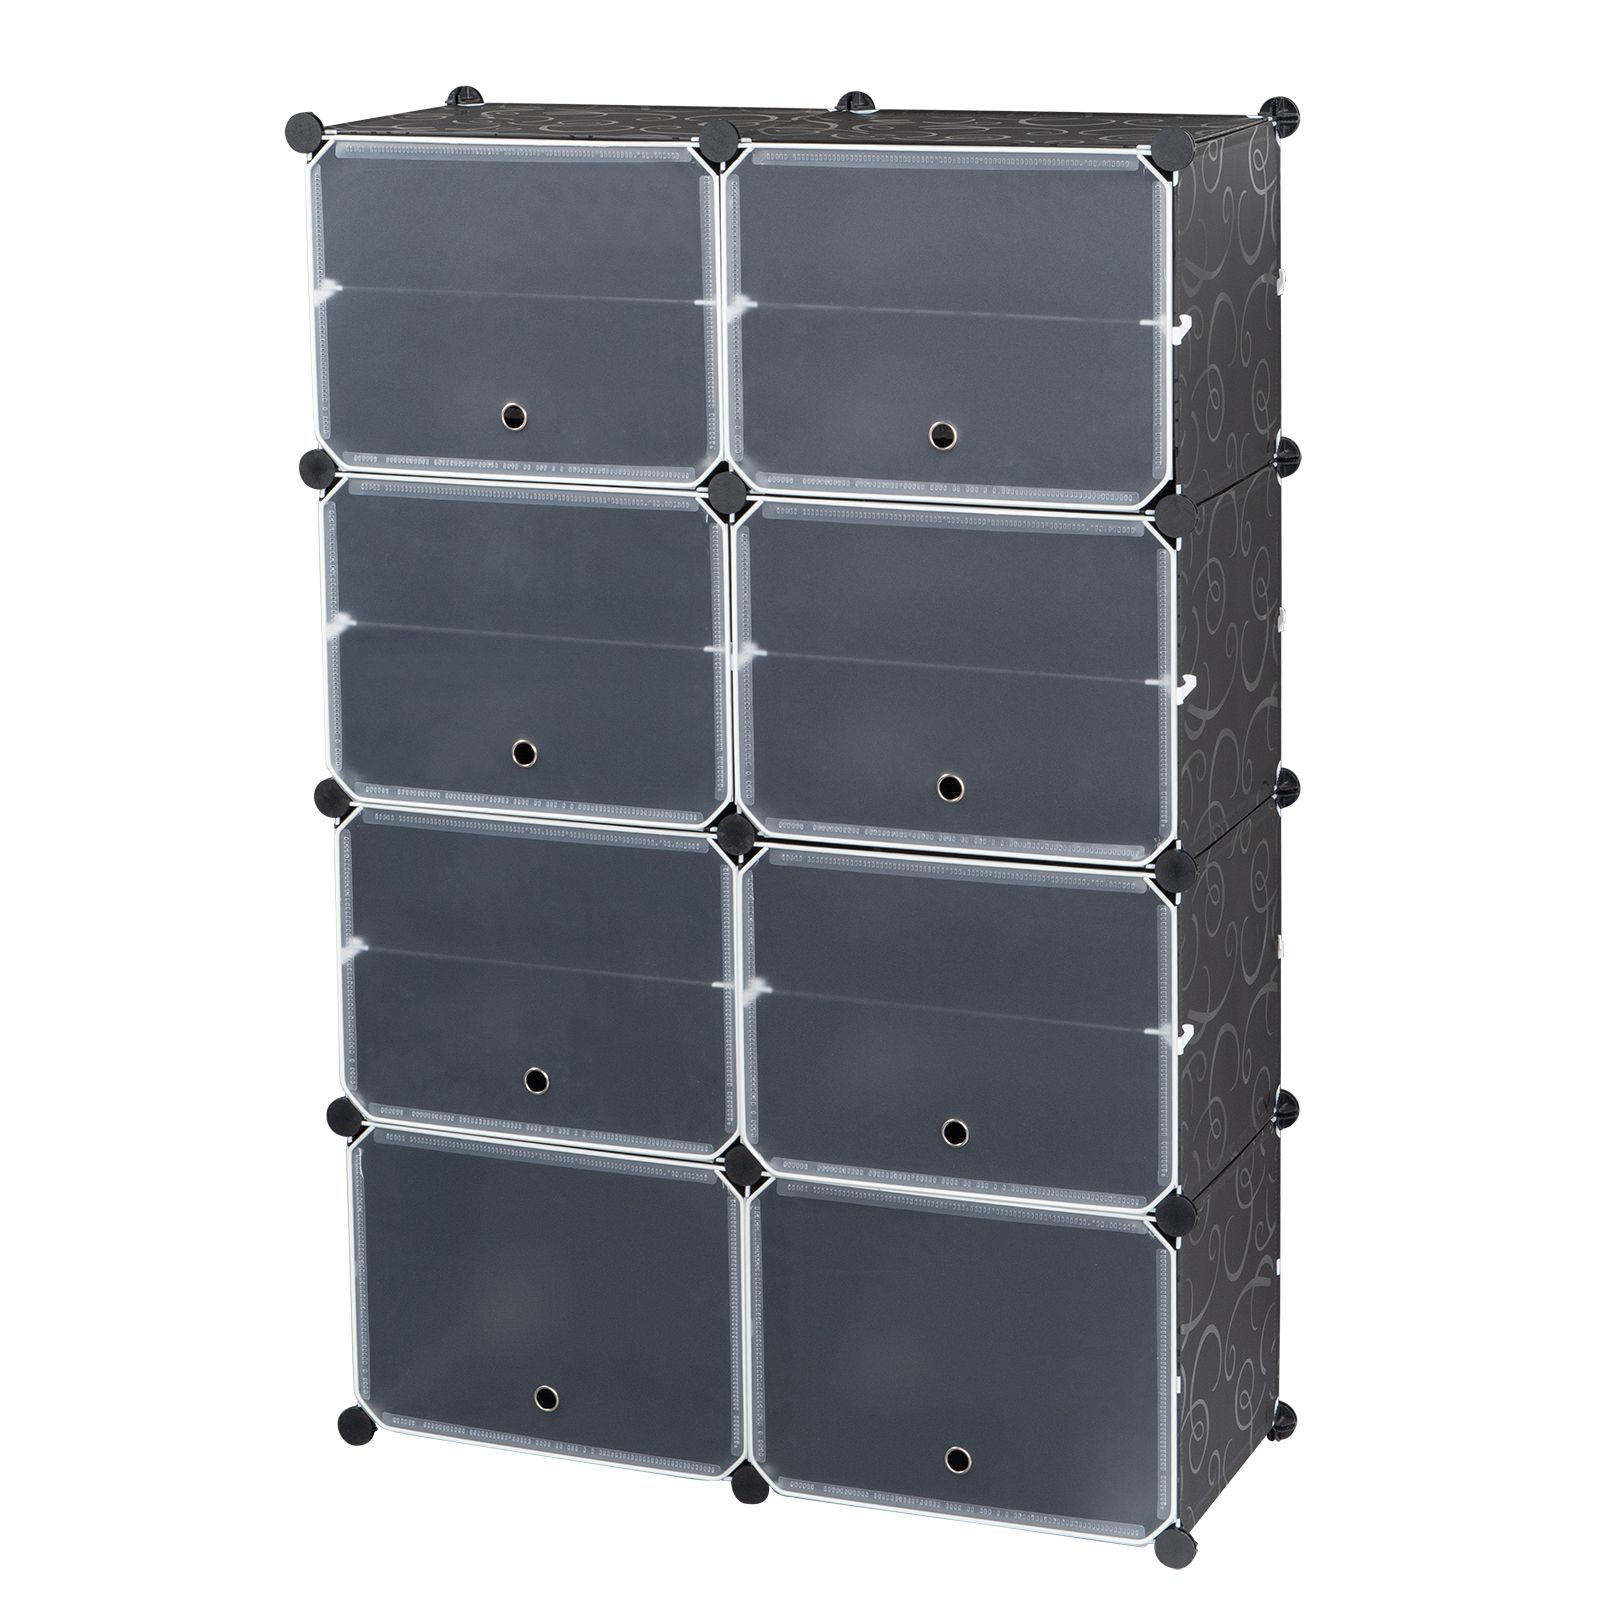 Tower Shelf Storage Boxes Shoes Rack Organizer, 14 Grids, 7-Tier Portable 28 Pair, Stand Expandable, for Heels, Boots, Slippers, Black